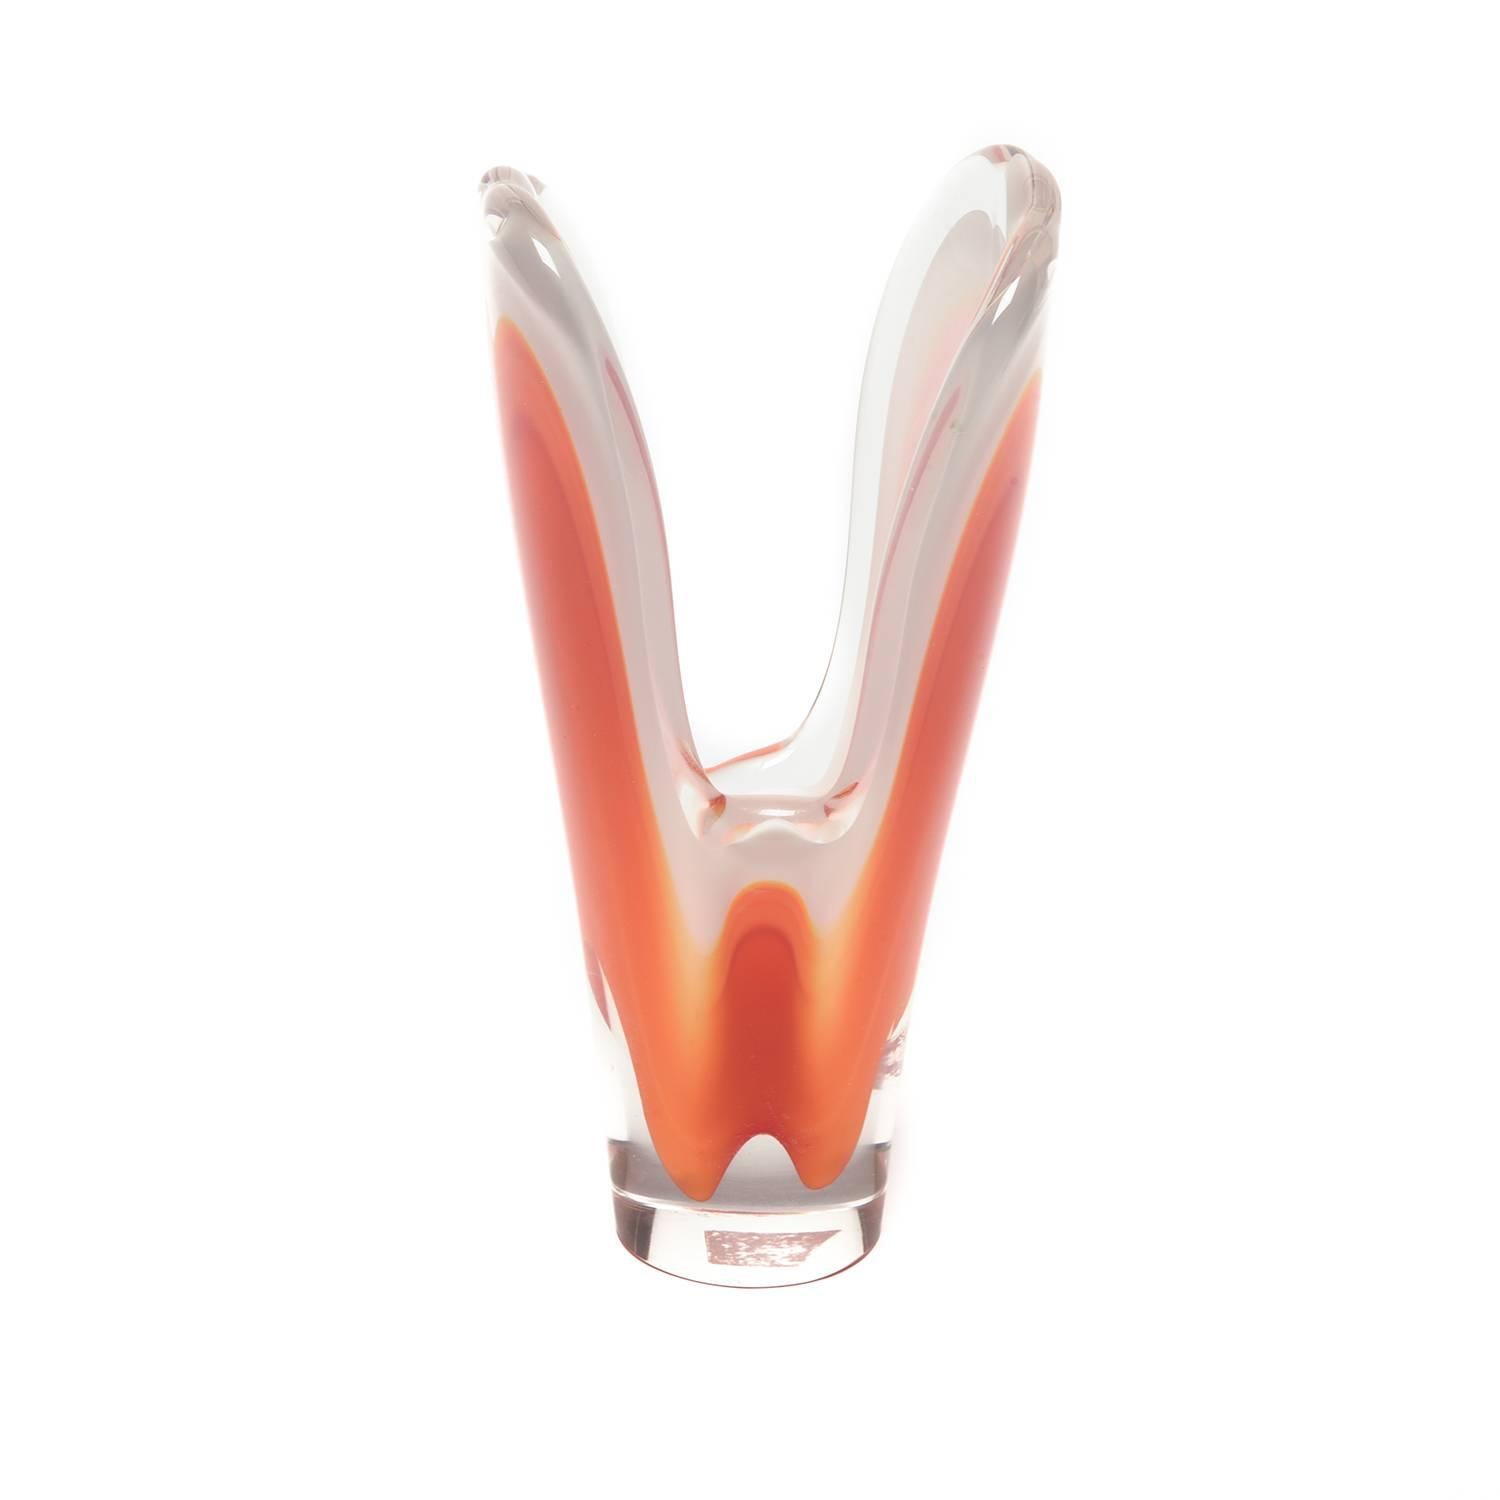 This Kedelv vase is sold individually, but we have one other item available in the same color.